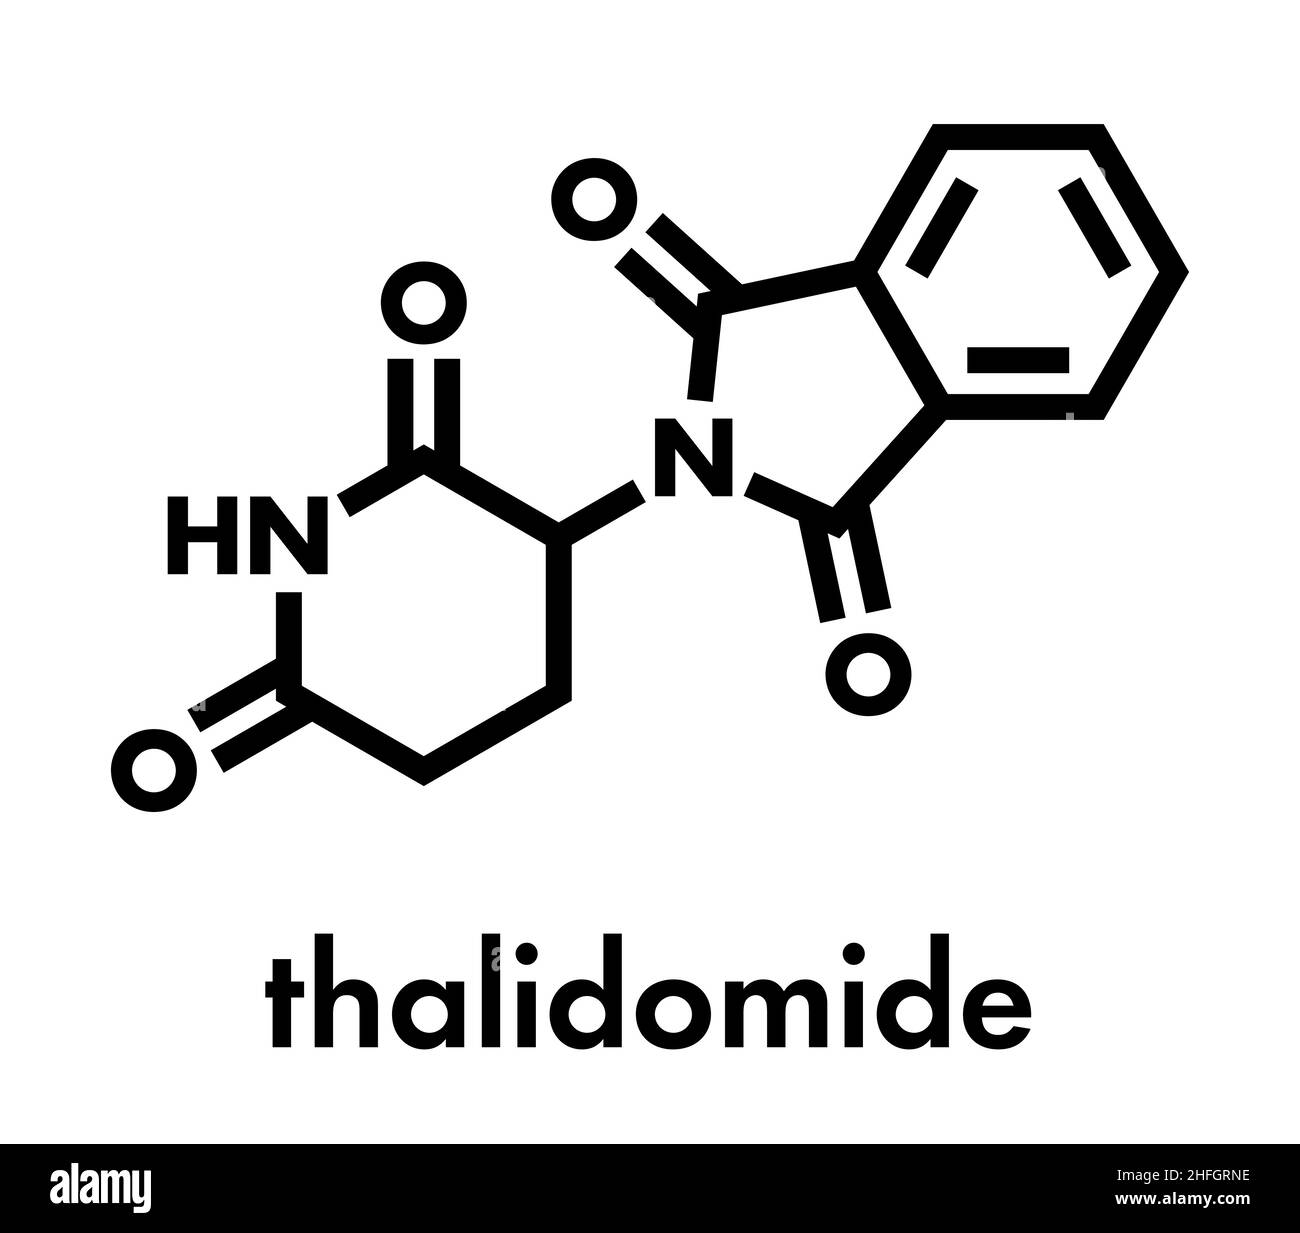 Thalidomide theratogenic drug molecule. Initially used as antiemetic to treat morning sickness in pregnant women but found to cause serious birth defe Stock Vector